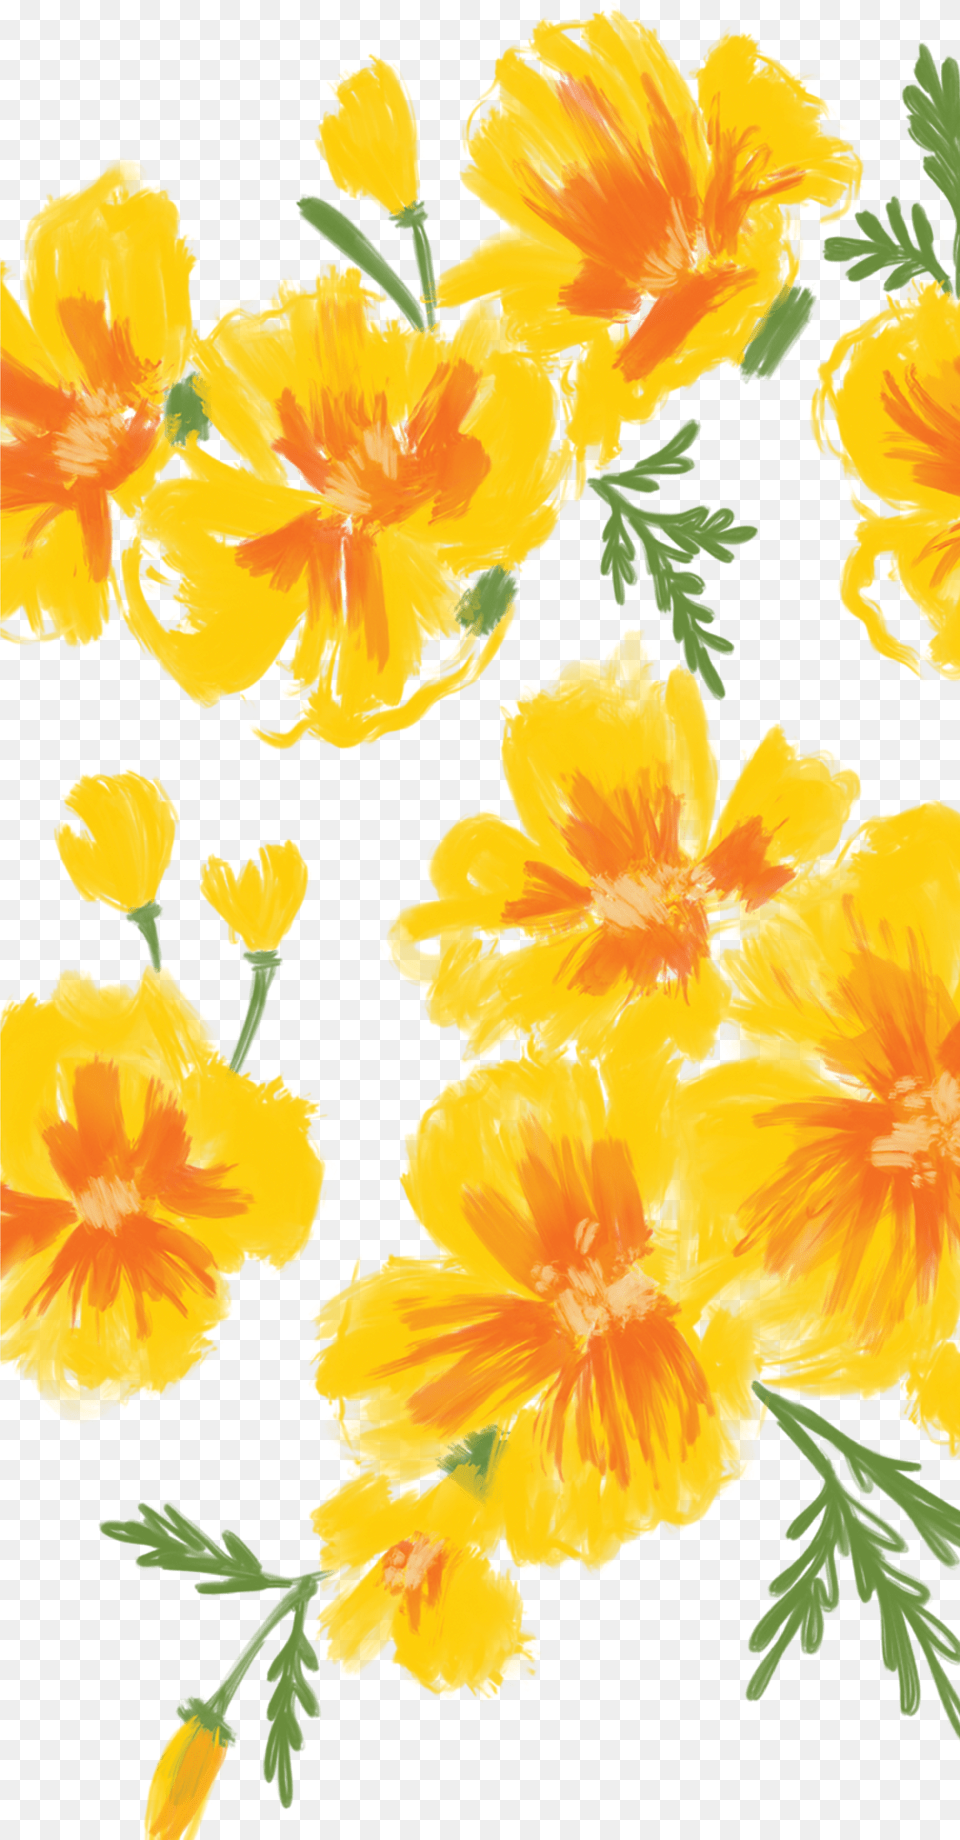 Poppies Iphone Floral Wallpaper Hd Free Transparent Png